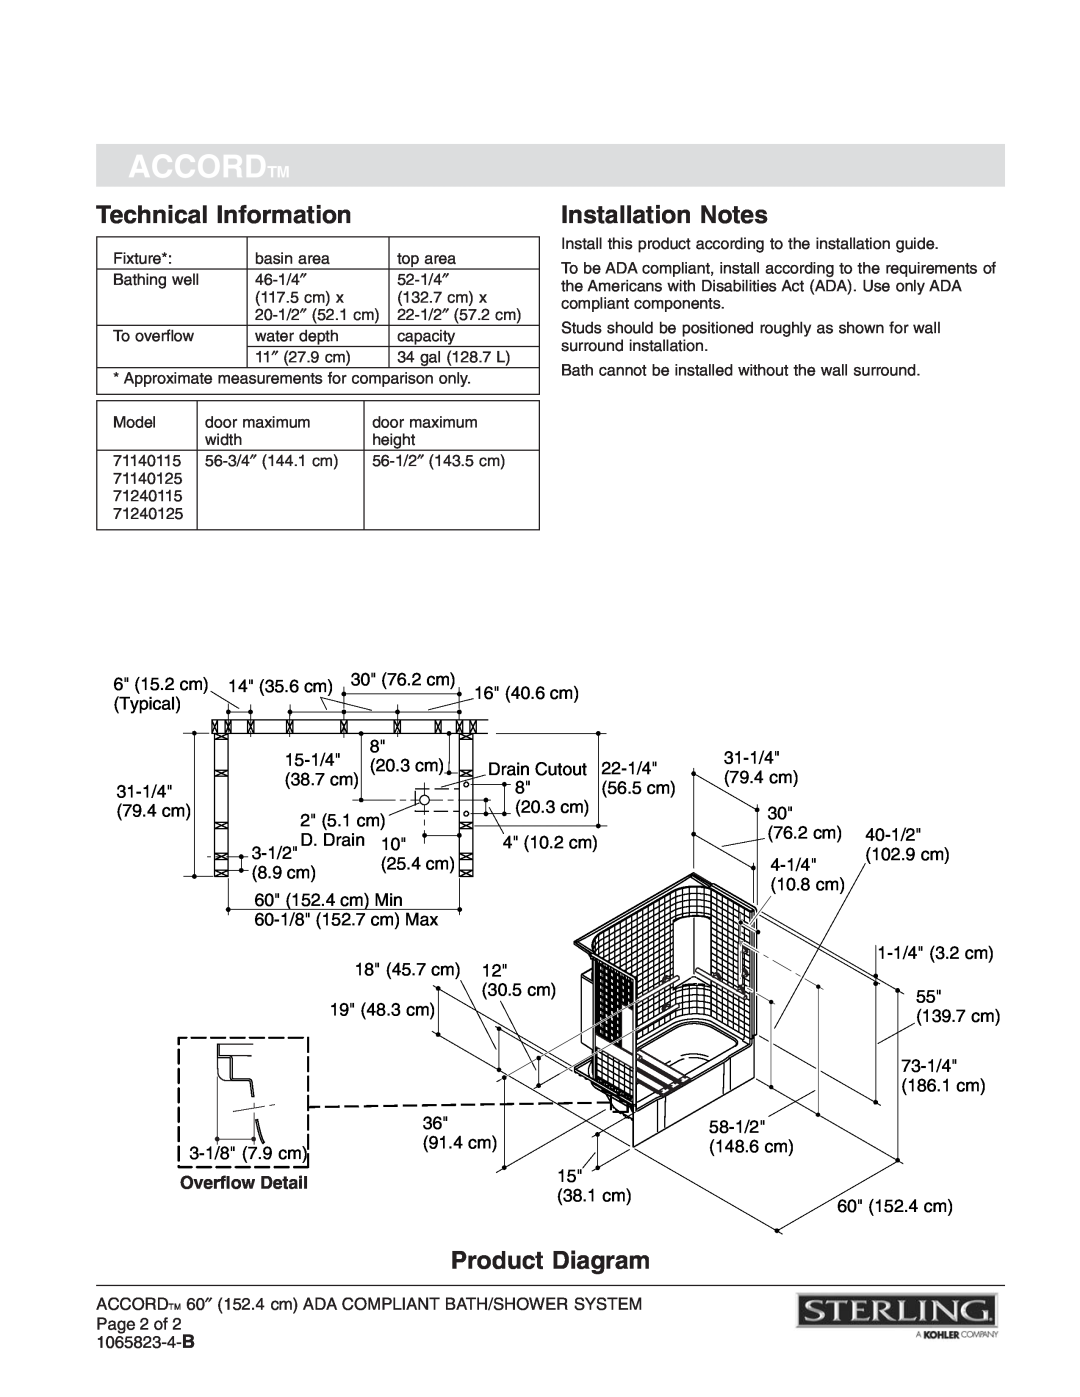 Sterling Plumbing 71140115, 71240125 Technical Information, Installation Notes, Product Diagram, 1065823-4-B, Accordtm 